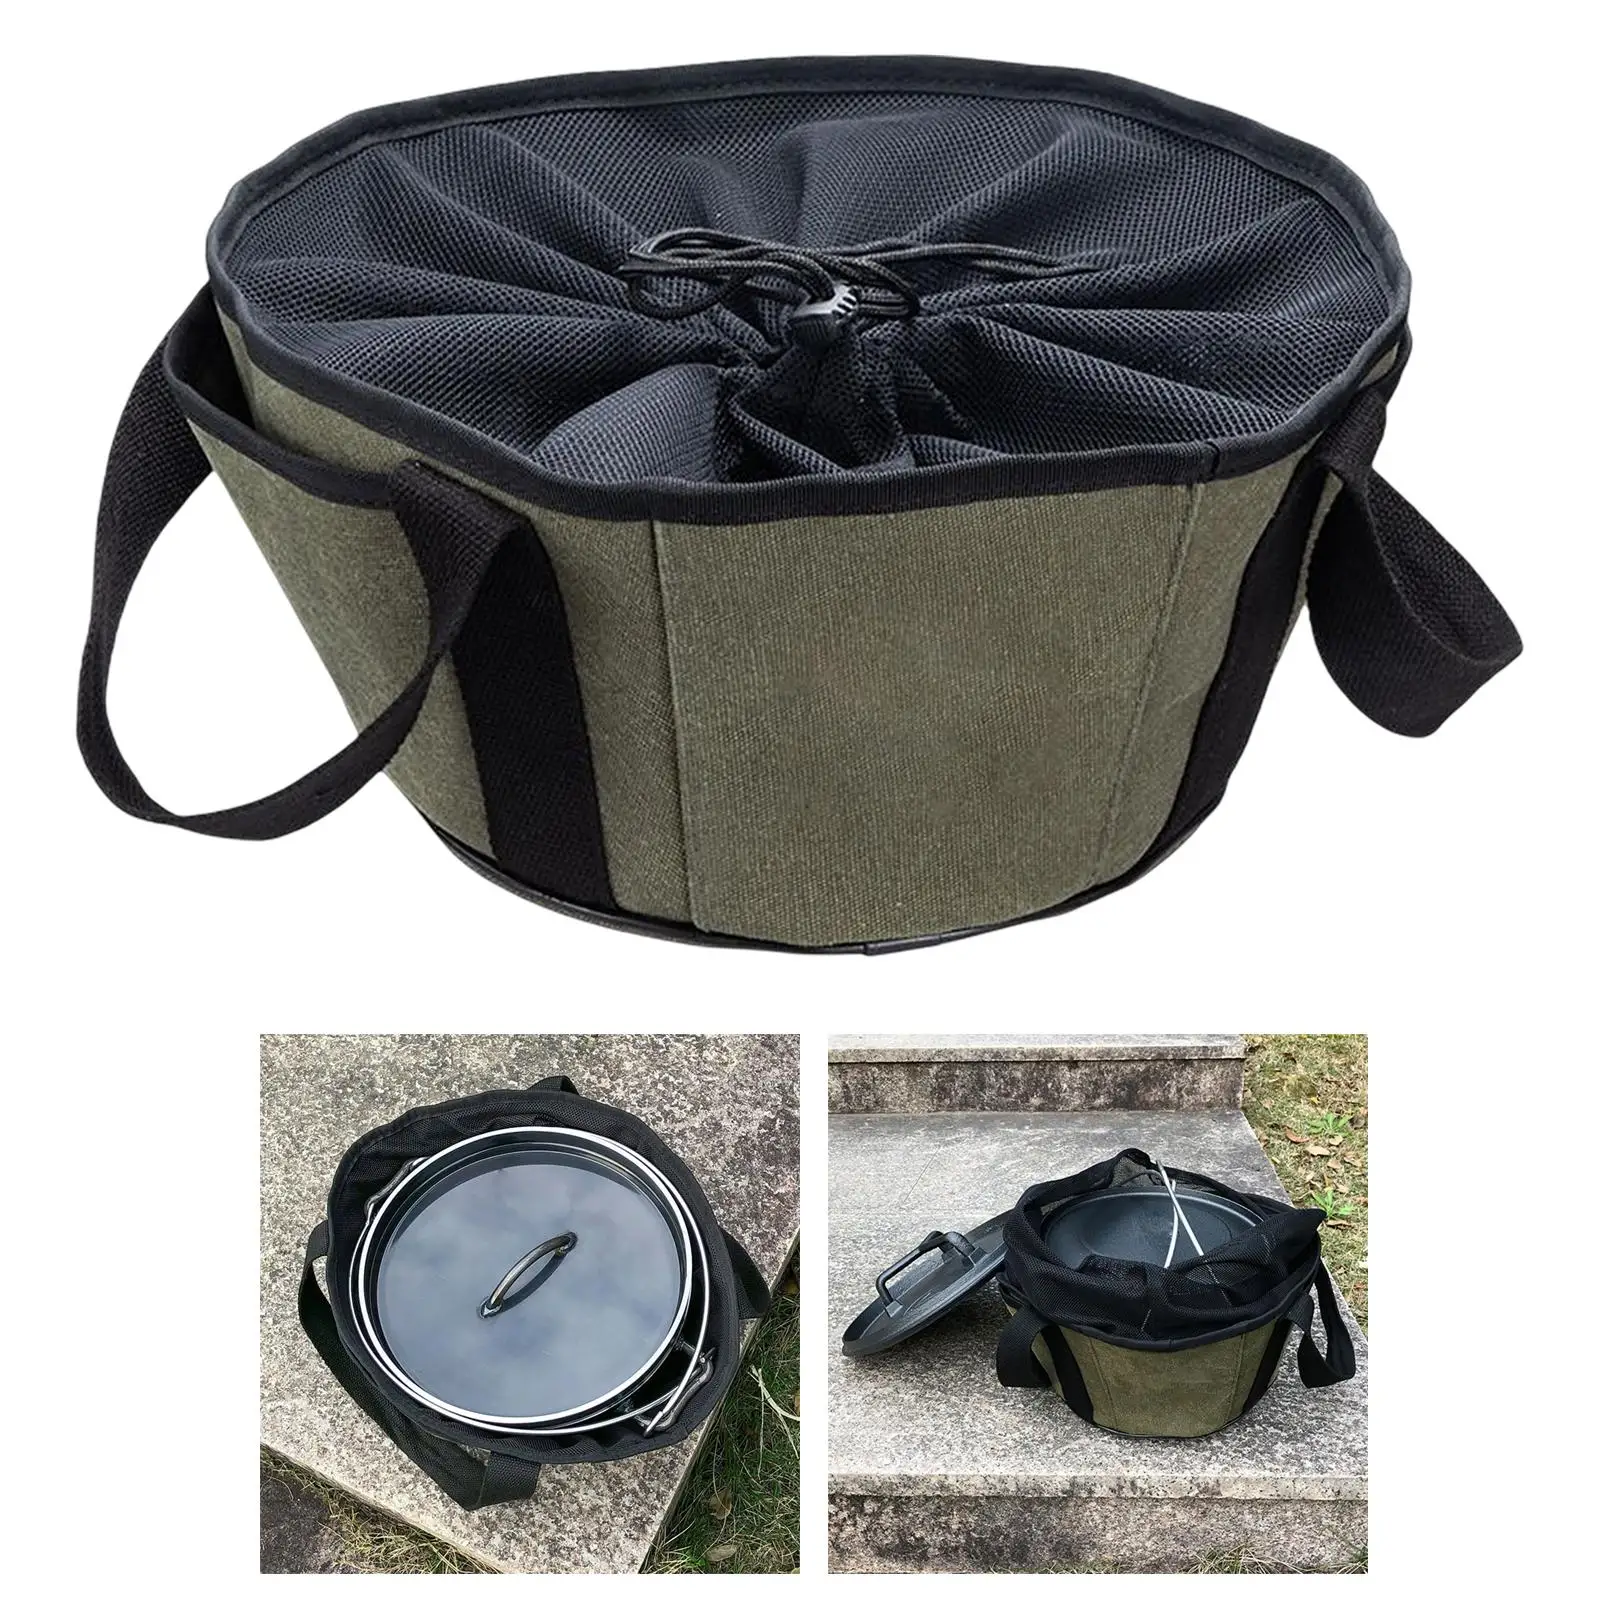 Storage Bag Portable Durable Accs Barbecue Storage Pouch for Hiking Outdoor